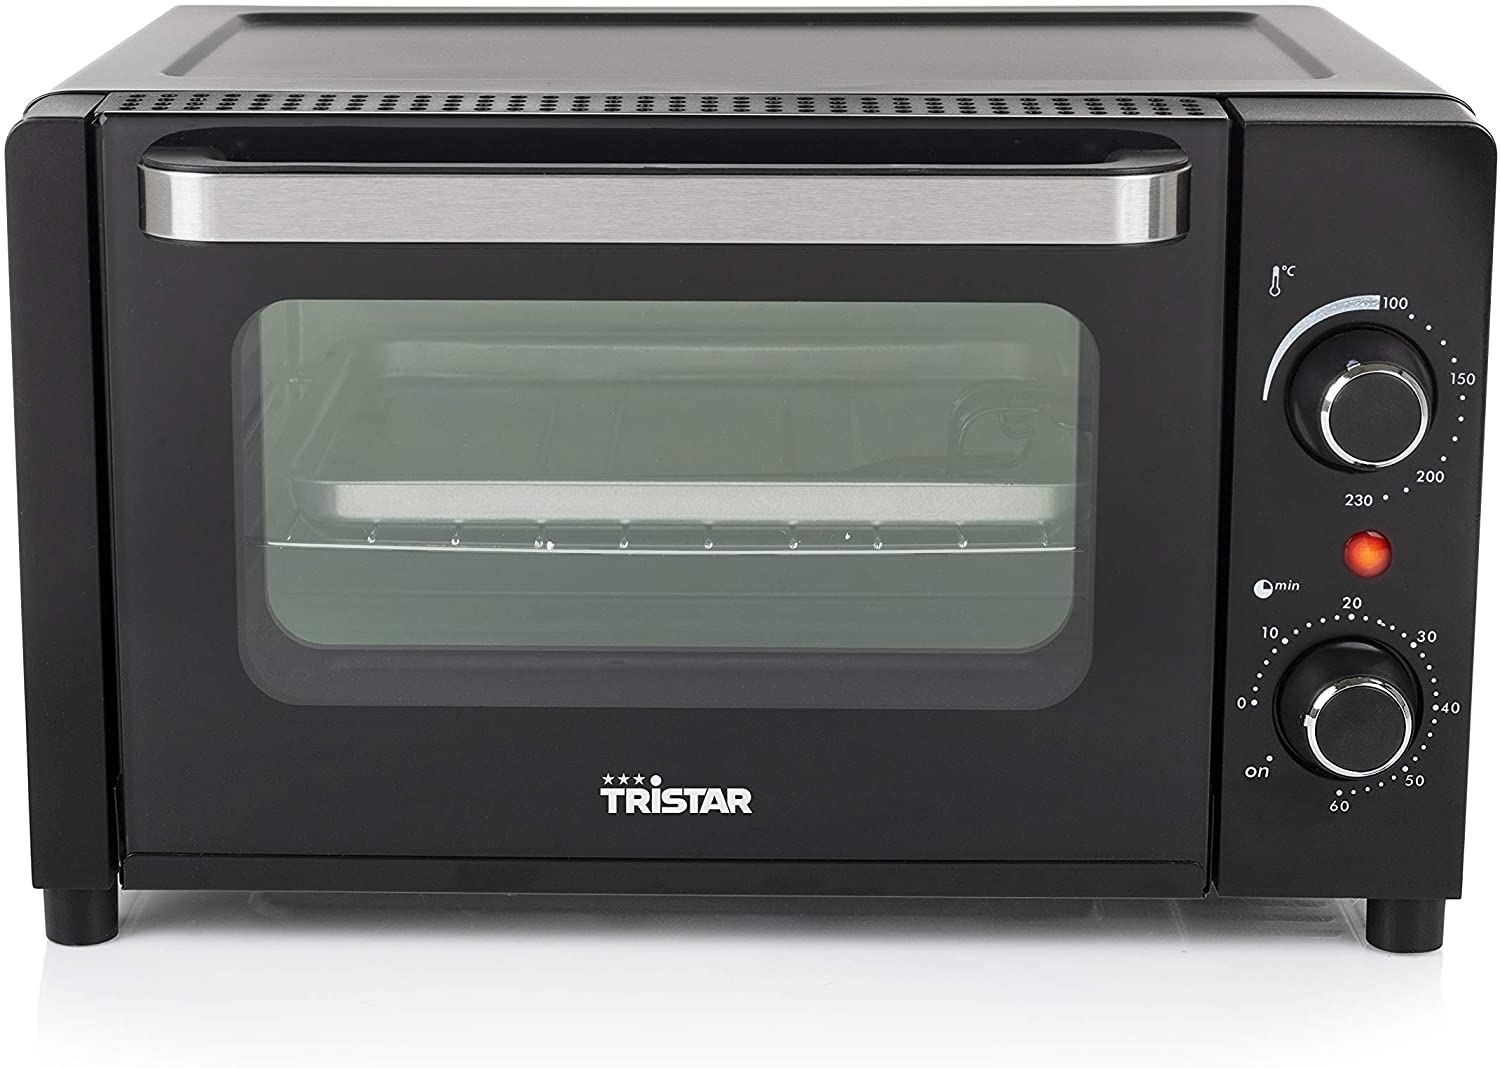 Tristar OV-3615 Mini Oven for Grilling, Baking and Toasting, 60 Minute Time